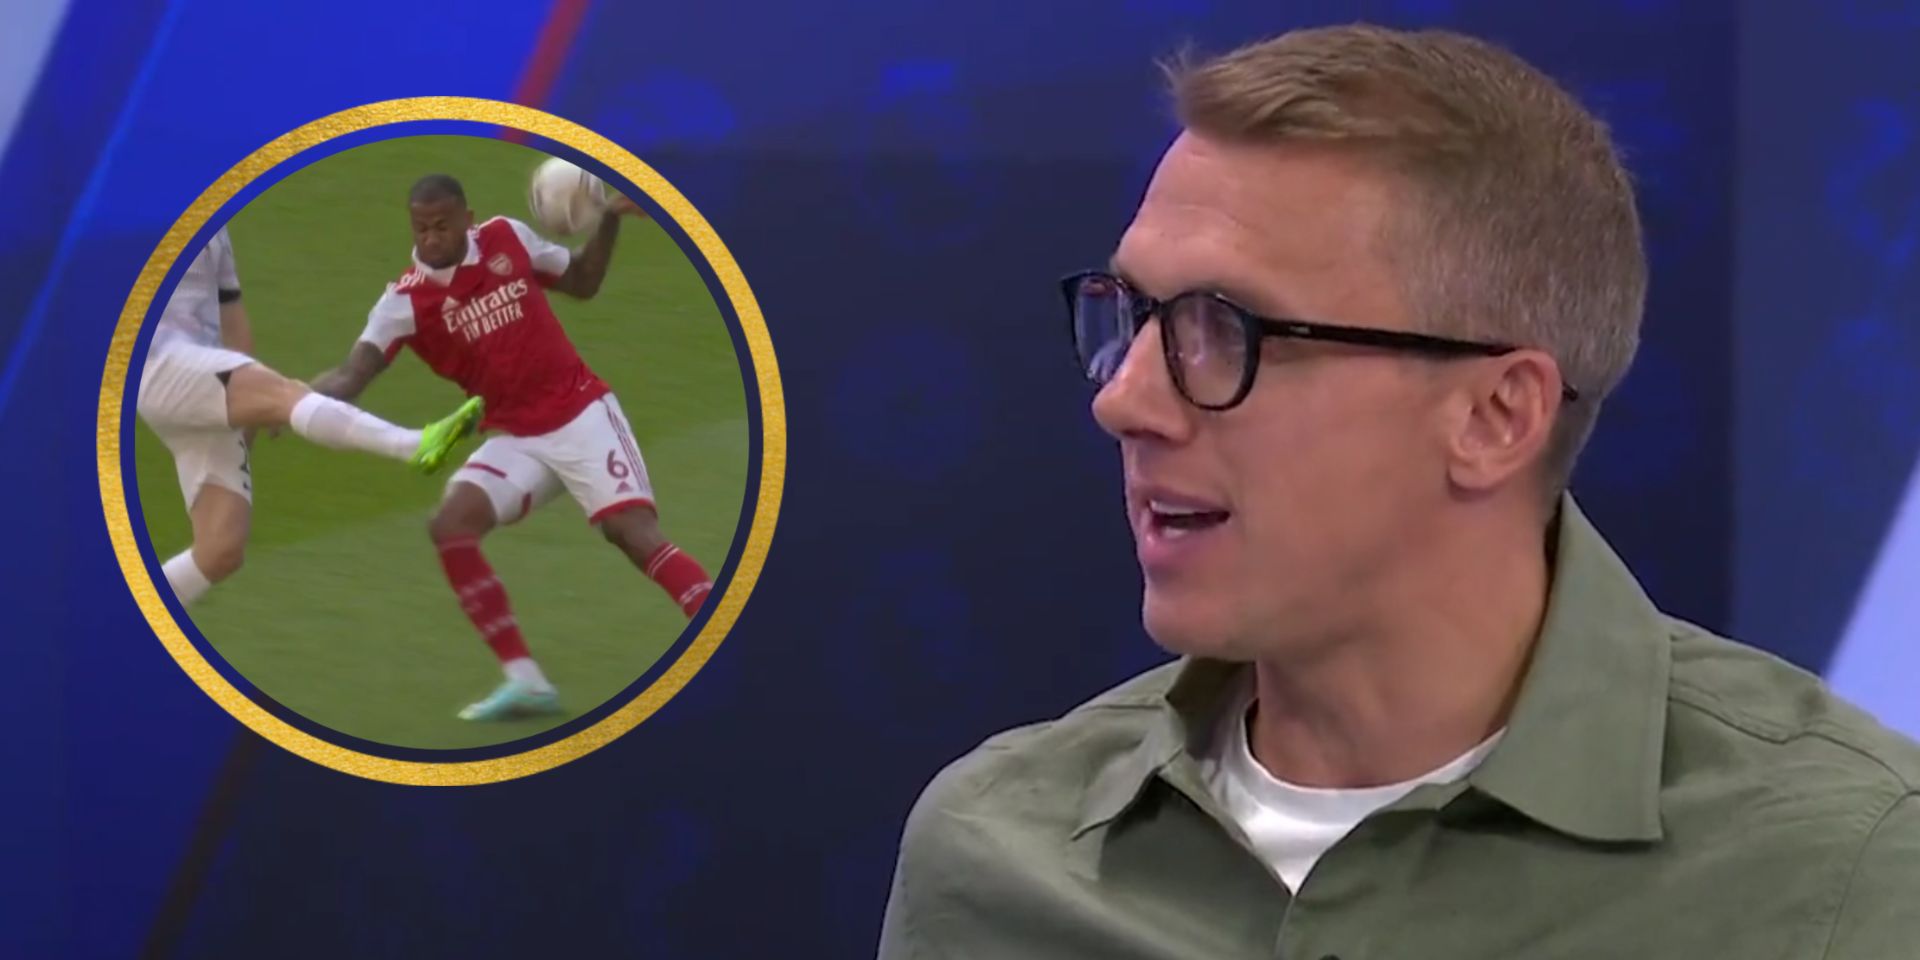 (Video) Ex-Red says “natural movement of the arms” means Gabriel handball call was correct